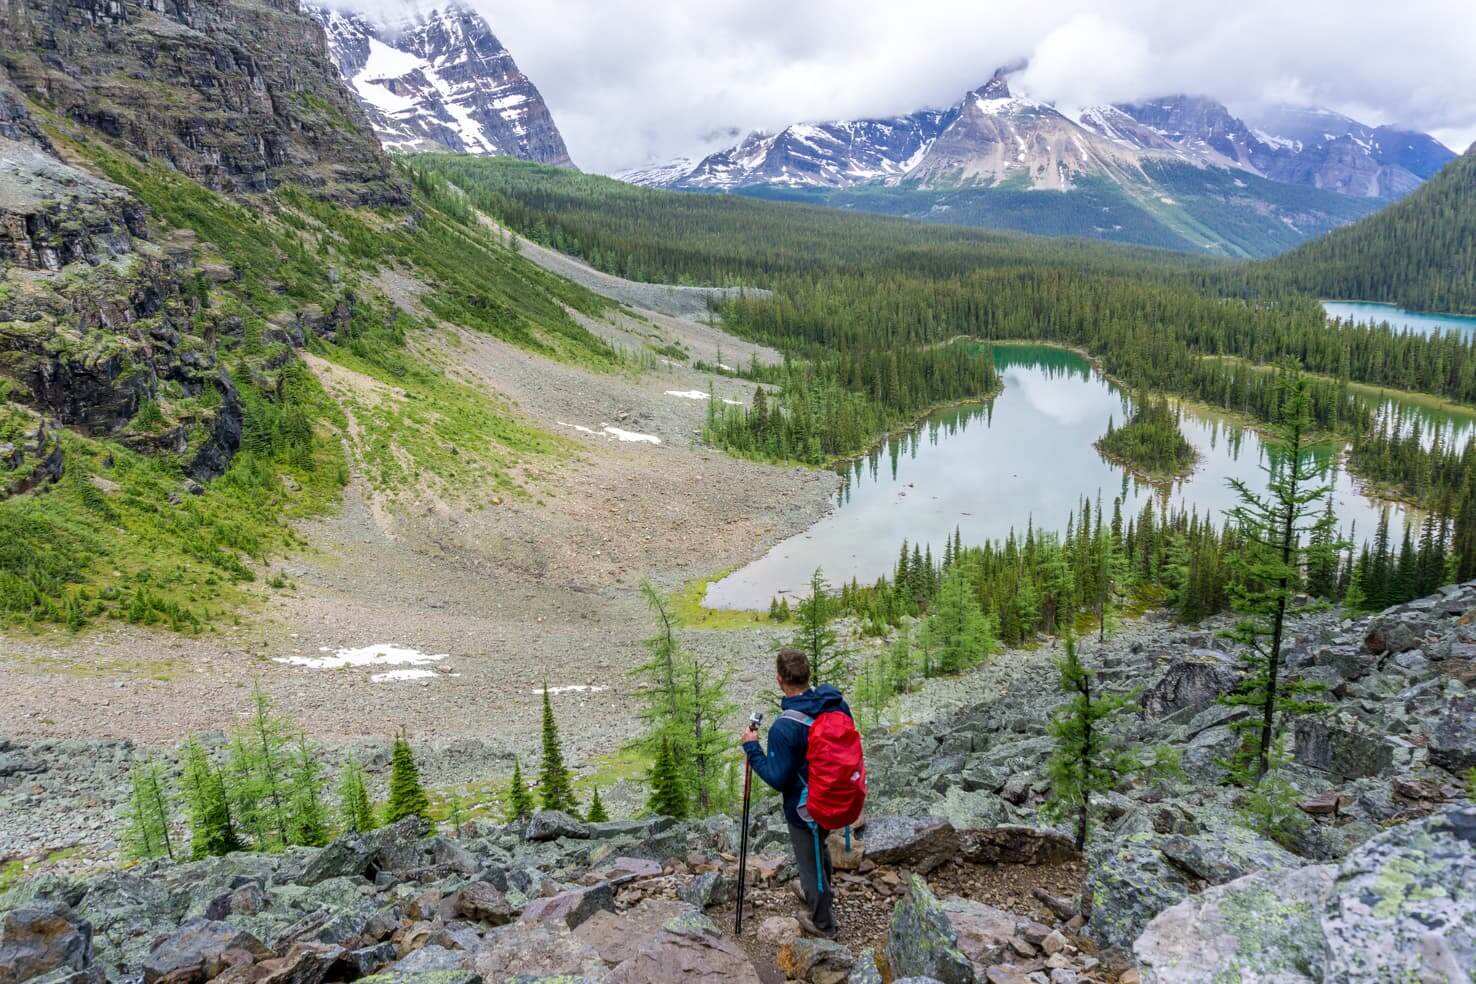 100 best things to do in Banff National Park, Canada - Stay overnight at magical Lake O’Hara